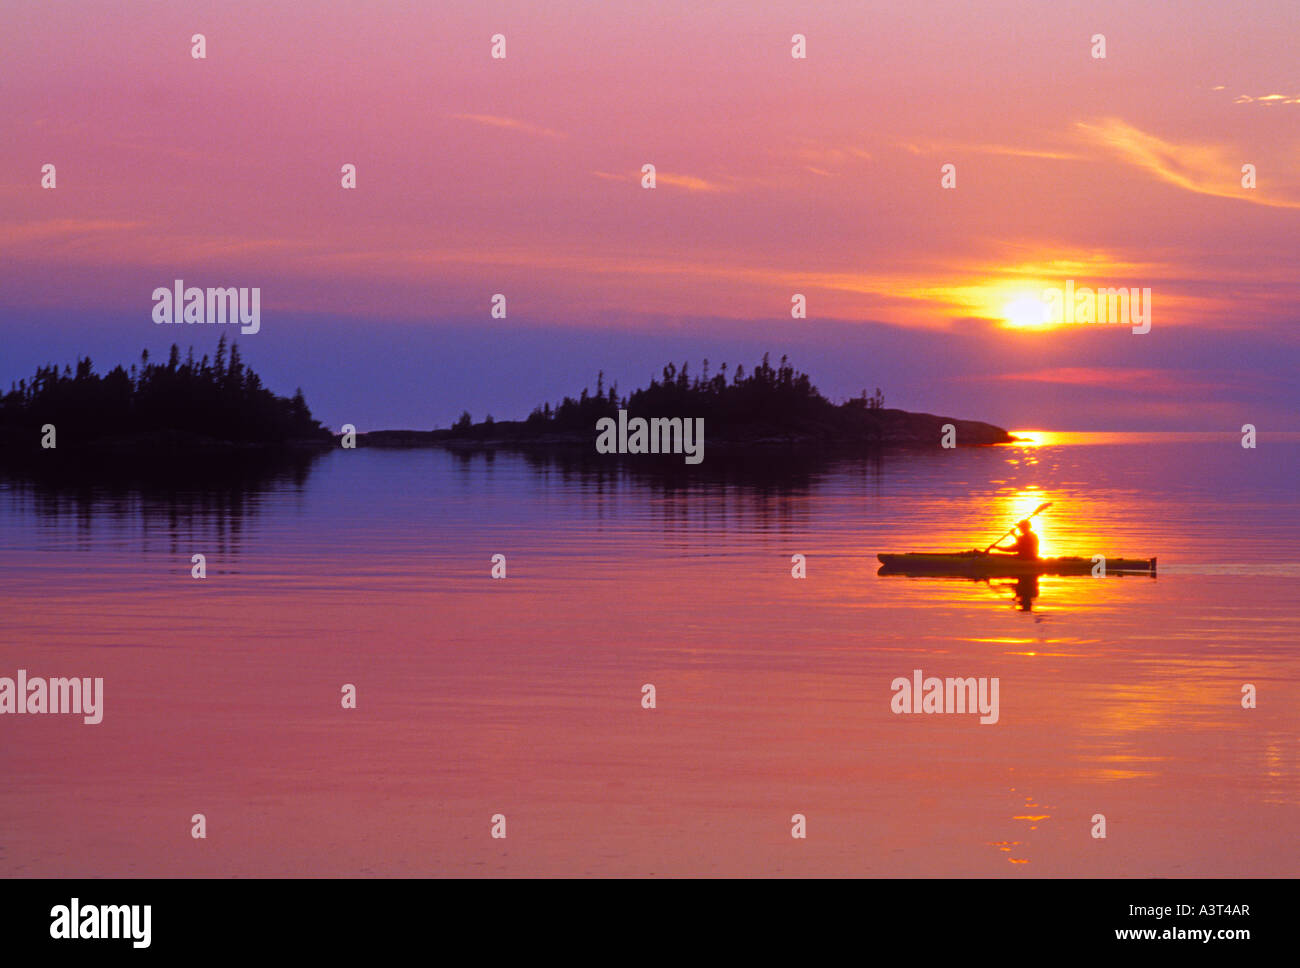 A kayaker is silhouetted at sunset on Lake Superior in Pukaskwa National Park near White River Ontario Stock Photo